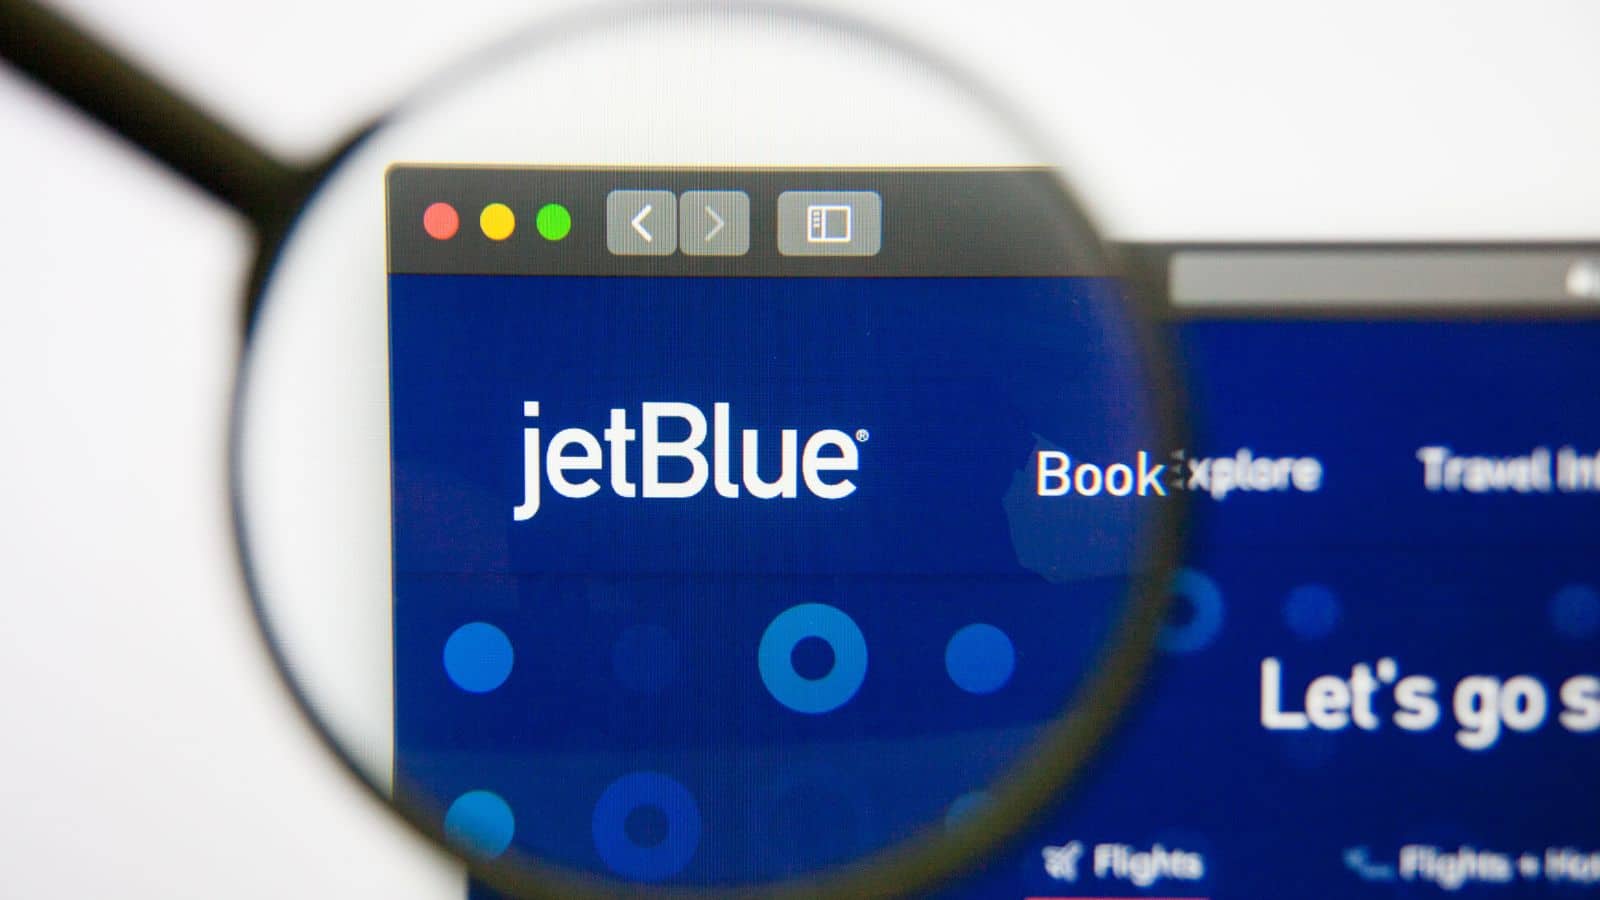 You Can Now Book Your Flight, Hotel, Or Rental Cara With TrueBlue Points